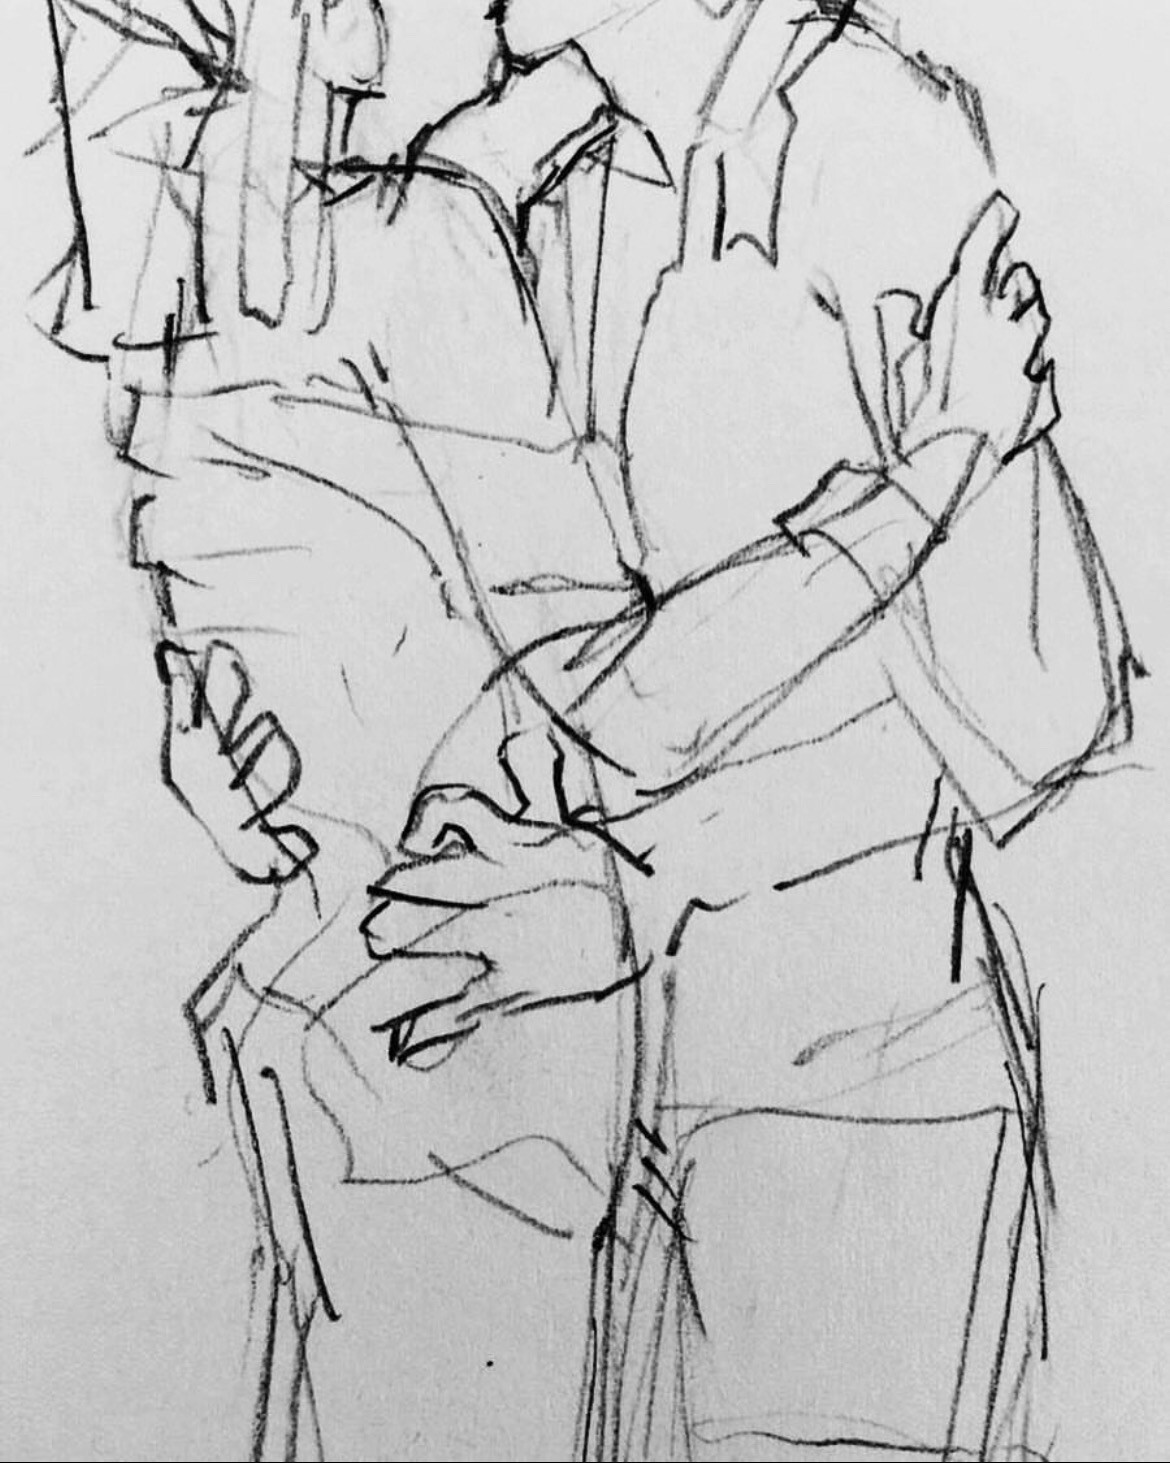 a pencil study of a man and woman kissing. his shirt is unbuttoned and hers is pulled down off her shoulders. he is holding her back and she is holding onto his arm.